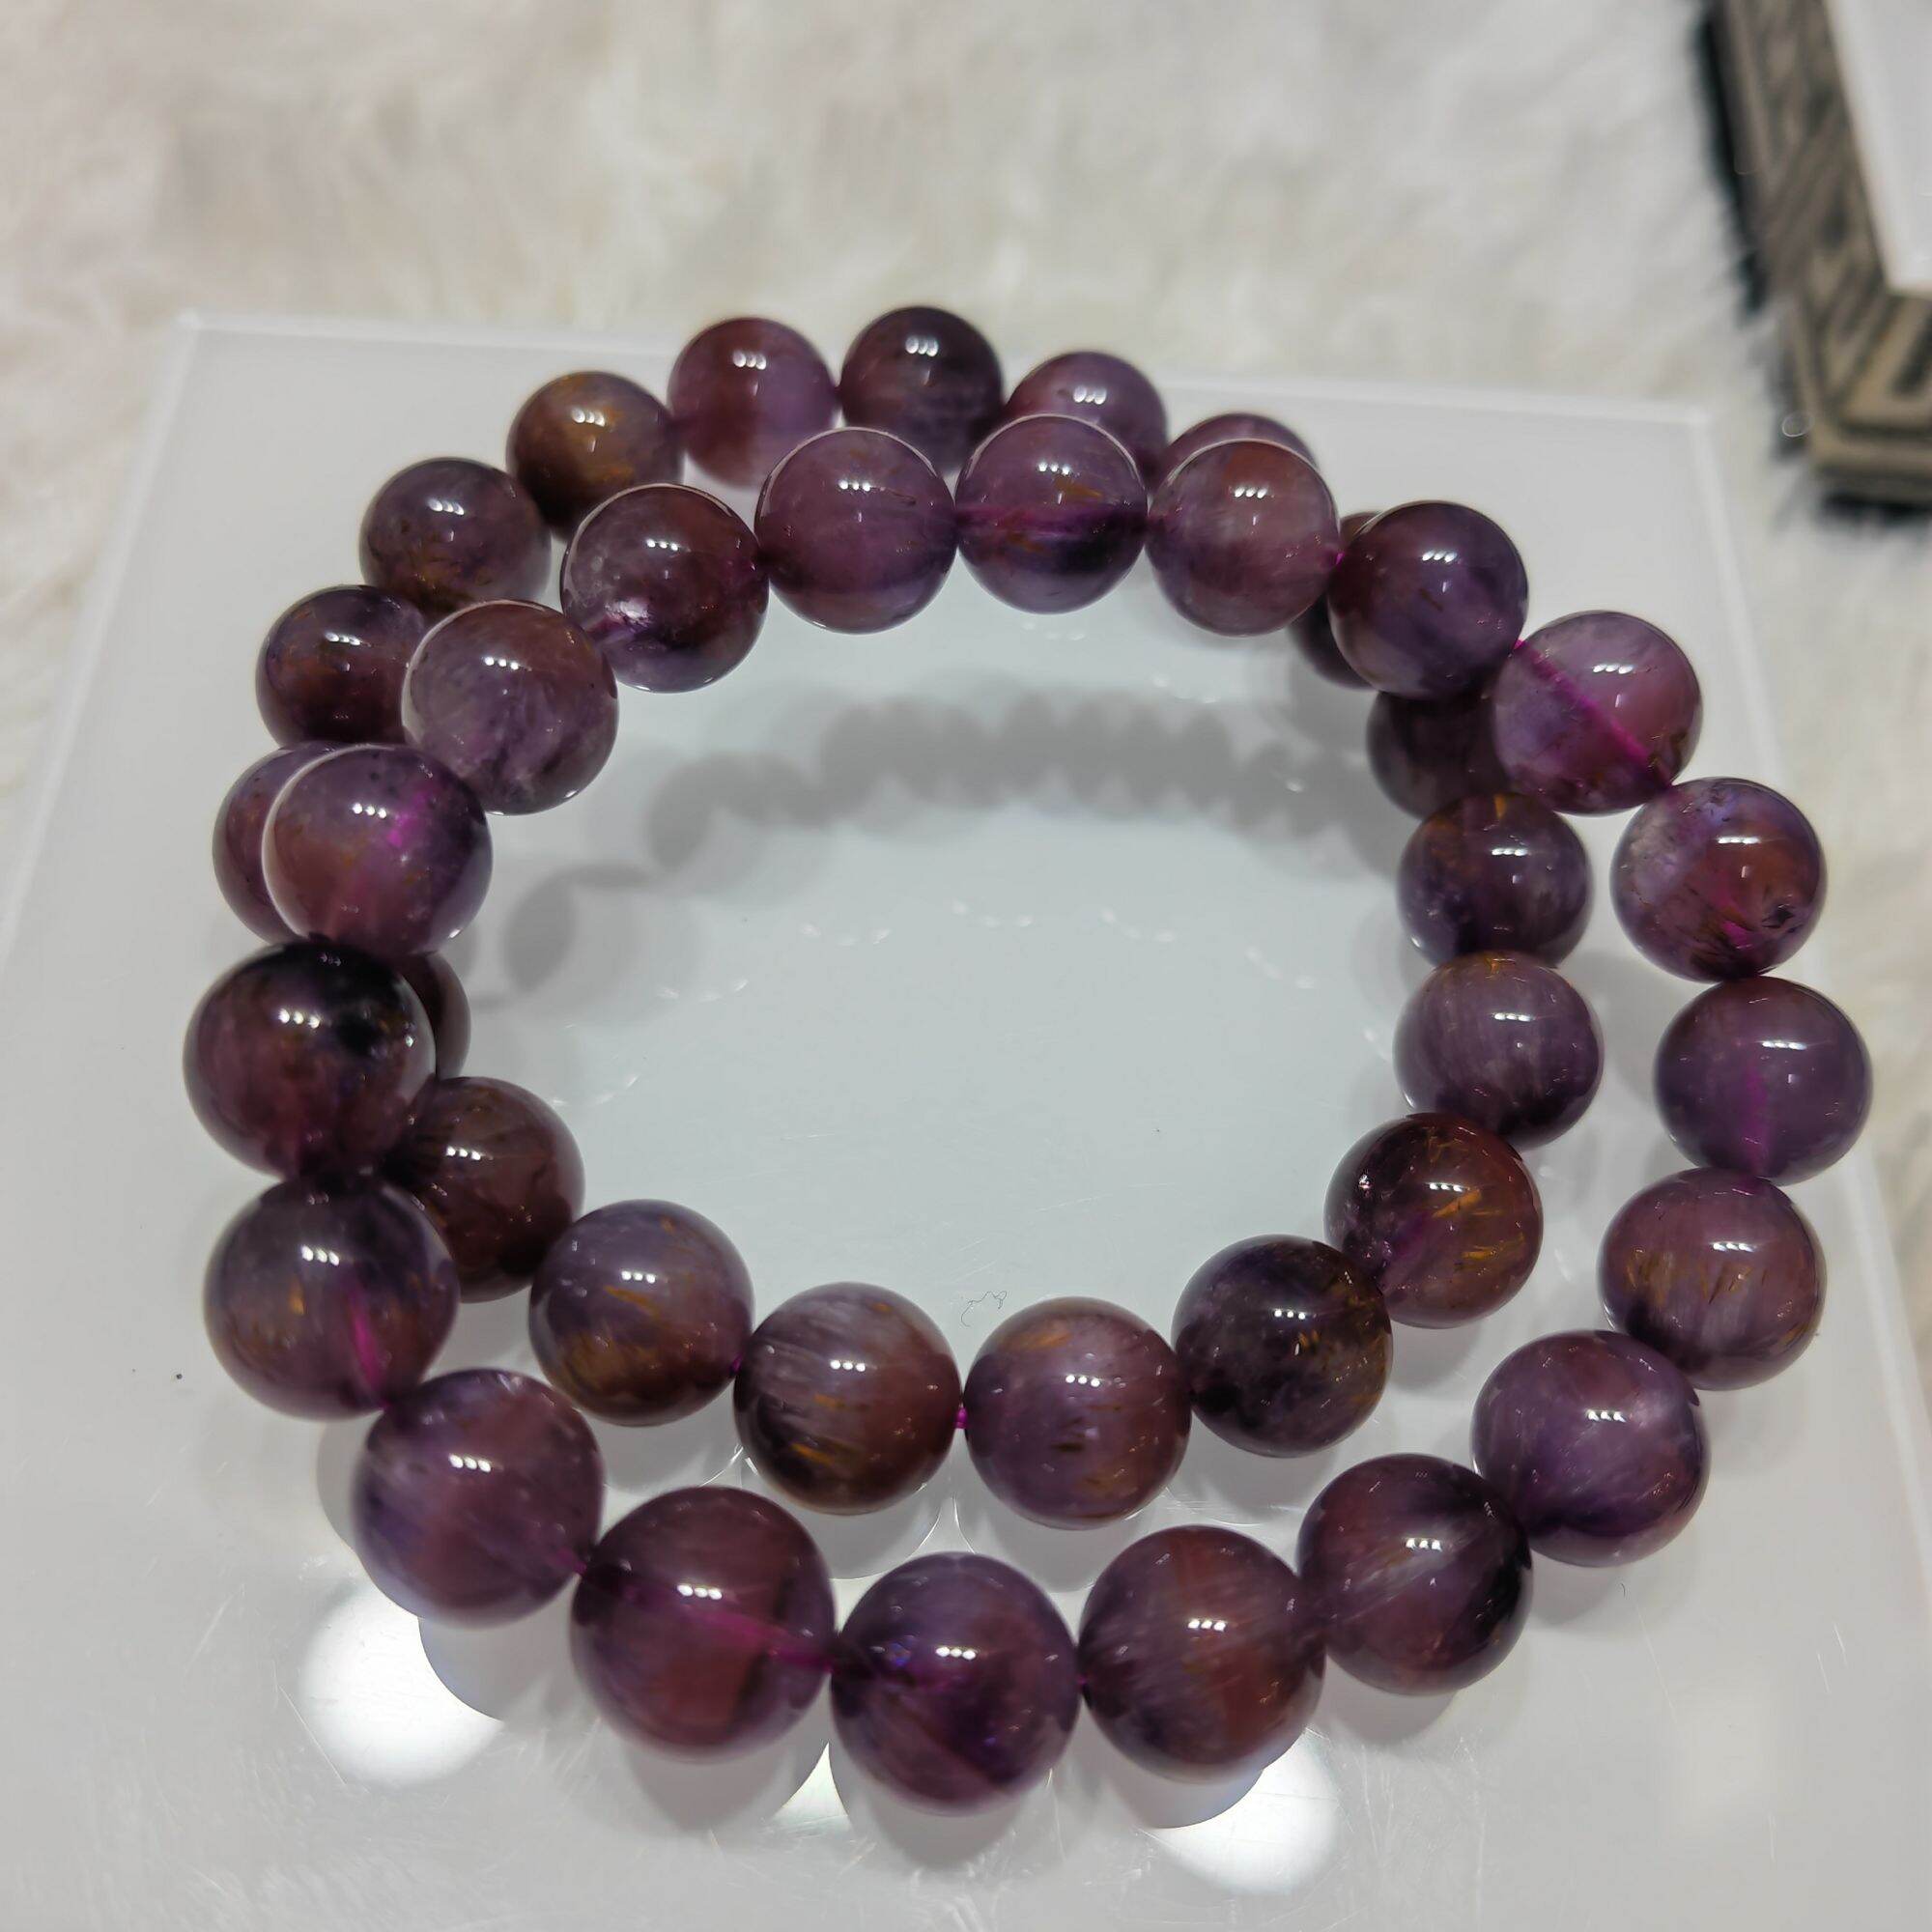 Fake Auralite 23 in the Market: Don't be fooled! - Crystal Dreams World